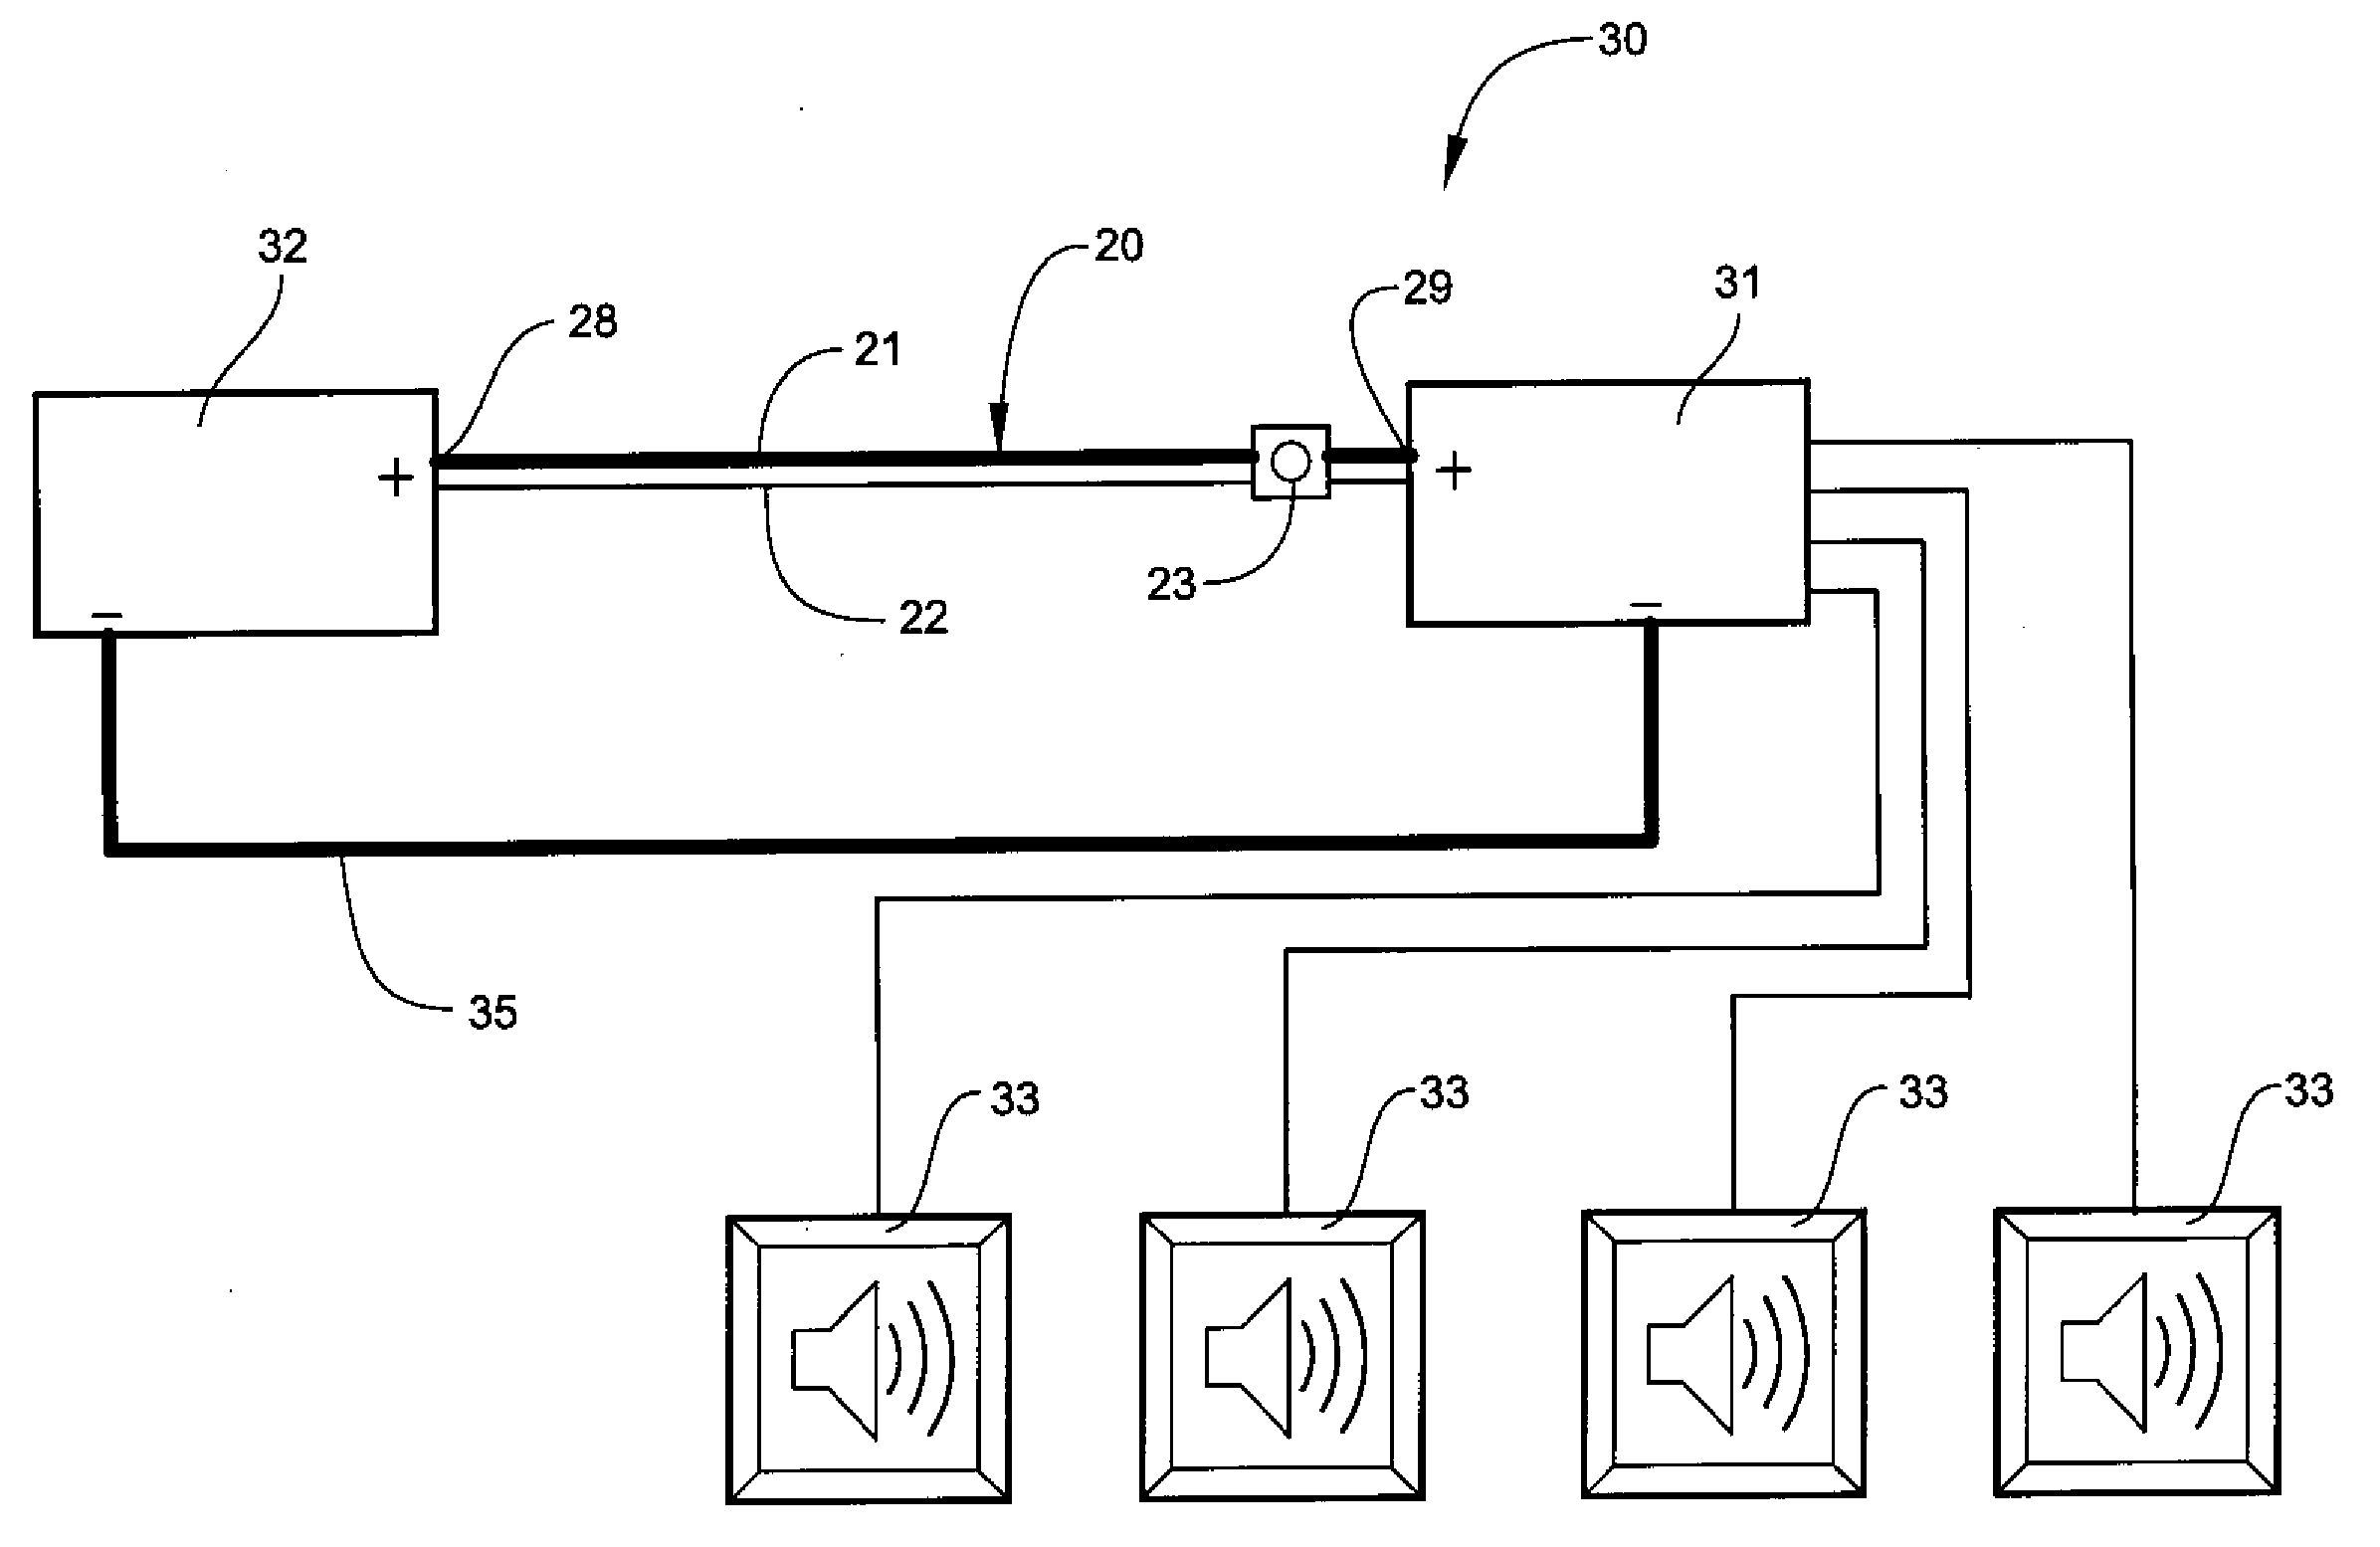 Electrical apparatus with voltage drop indicator